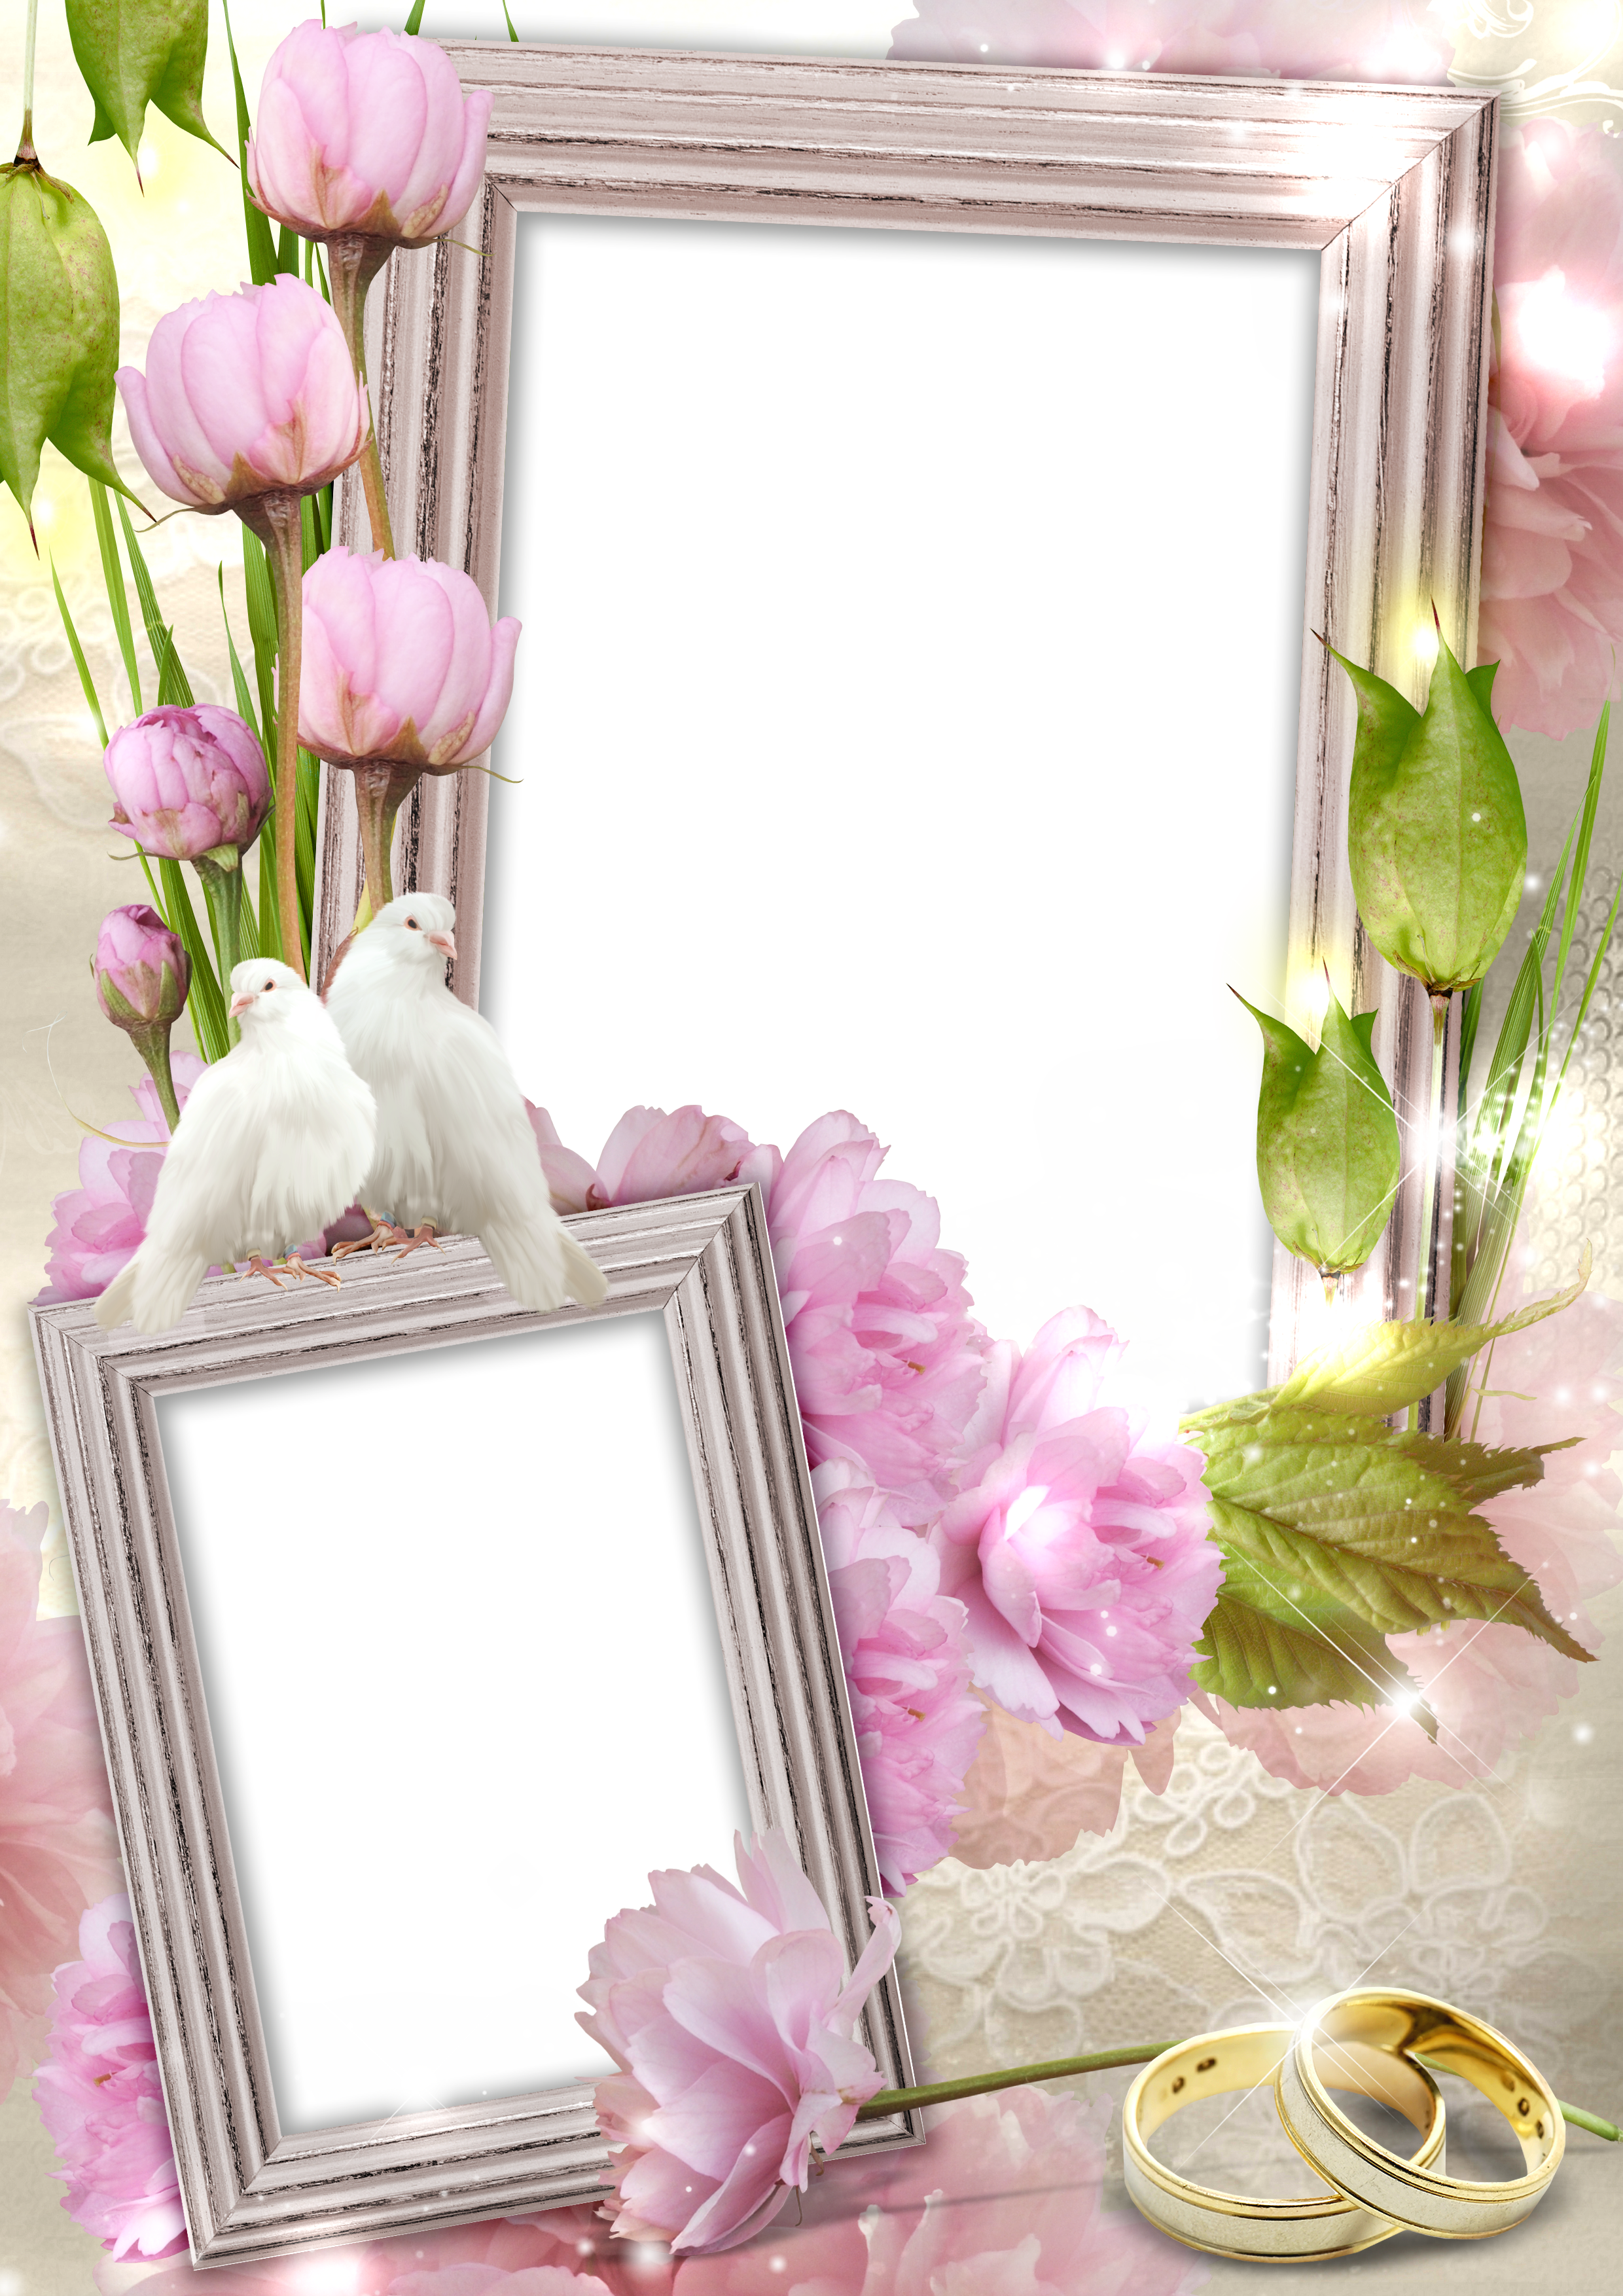 Transparent Wedding Frame with Rings and Doves.